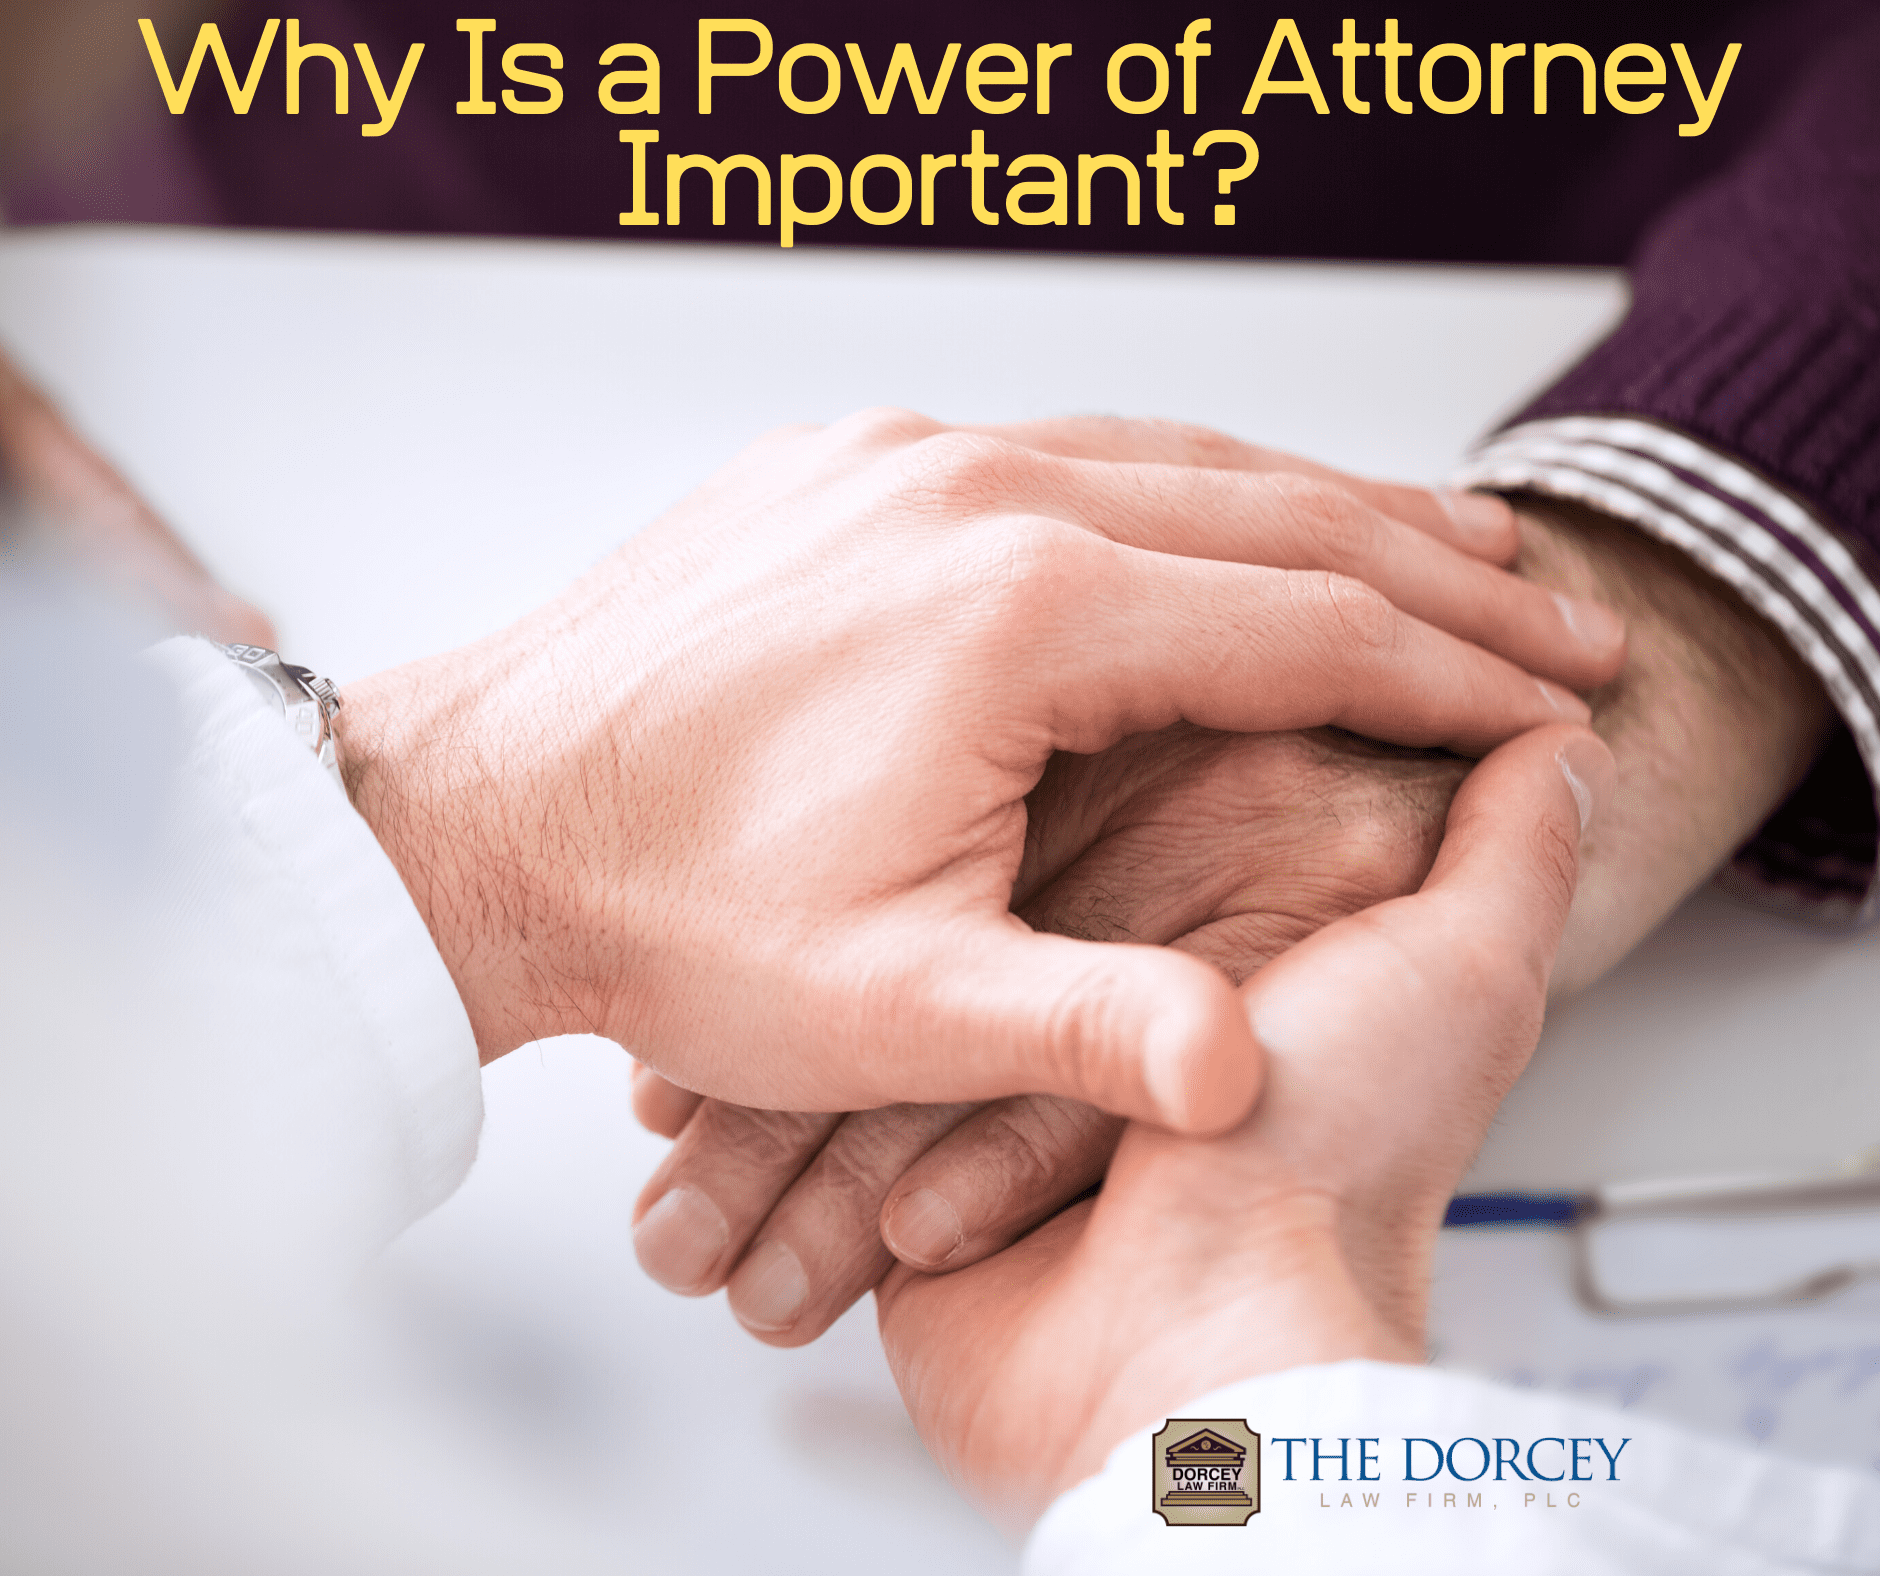 Why Is a Power of Attorney Important?